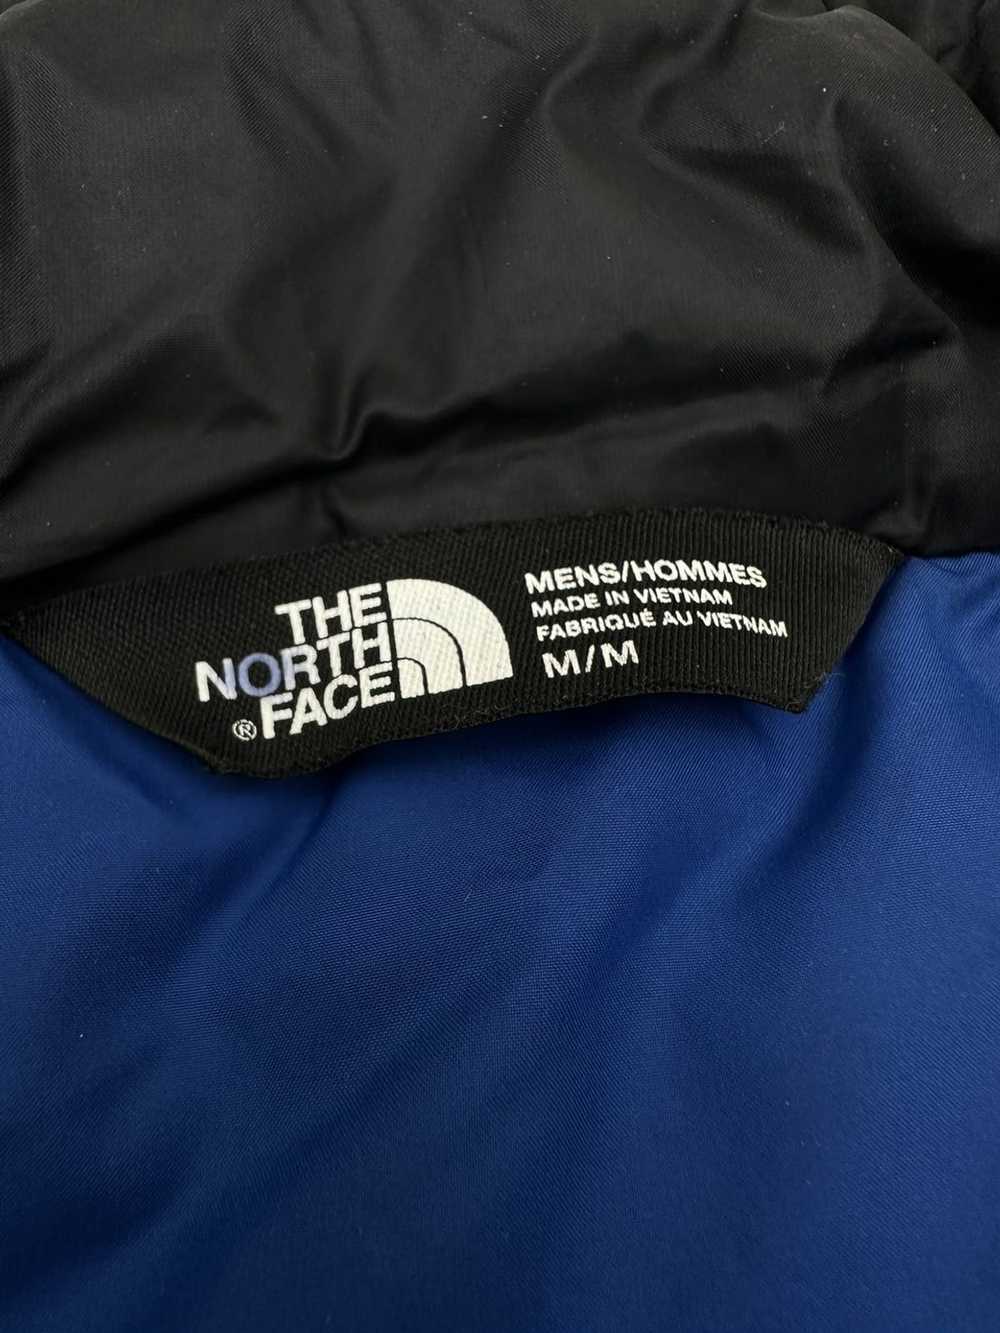 The North Face The North Face Black + Blue Light … - image 6